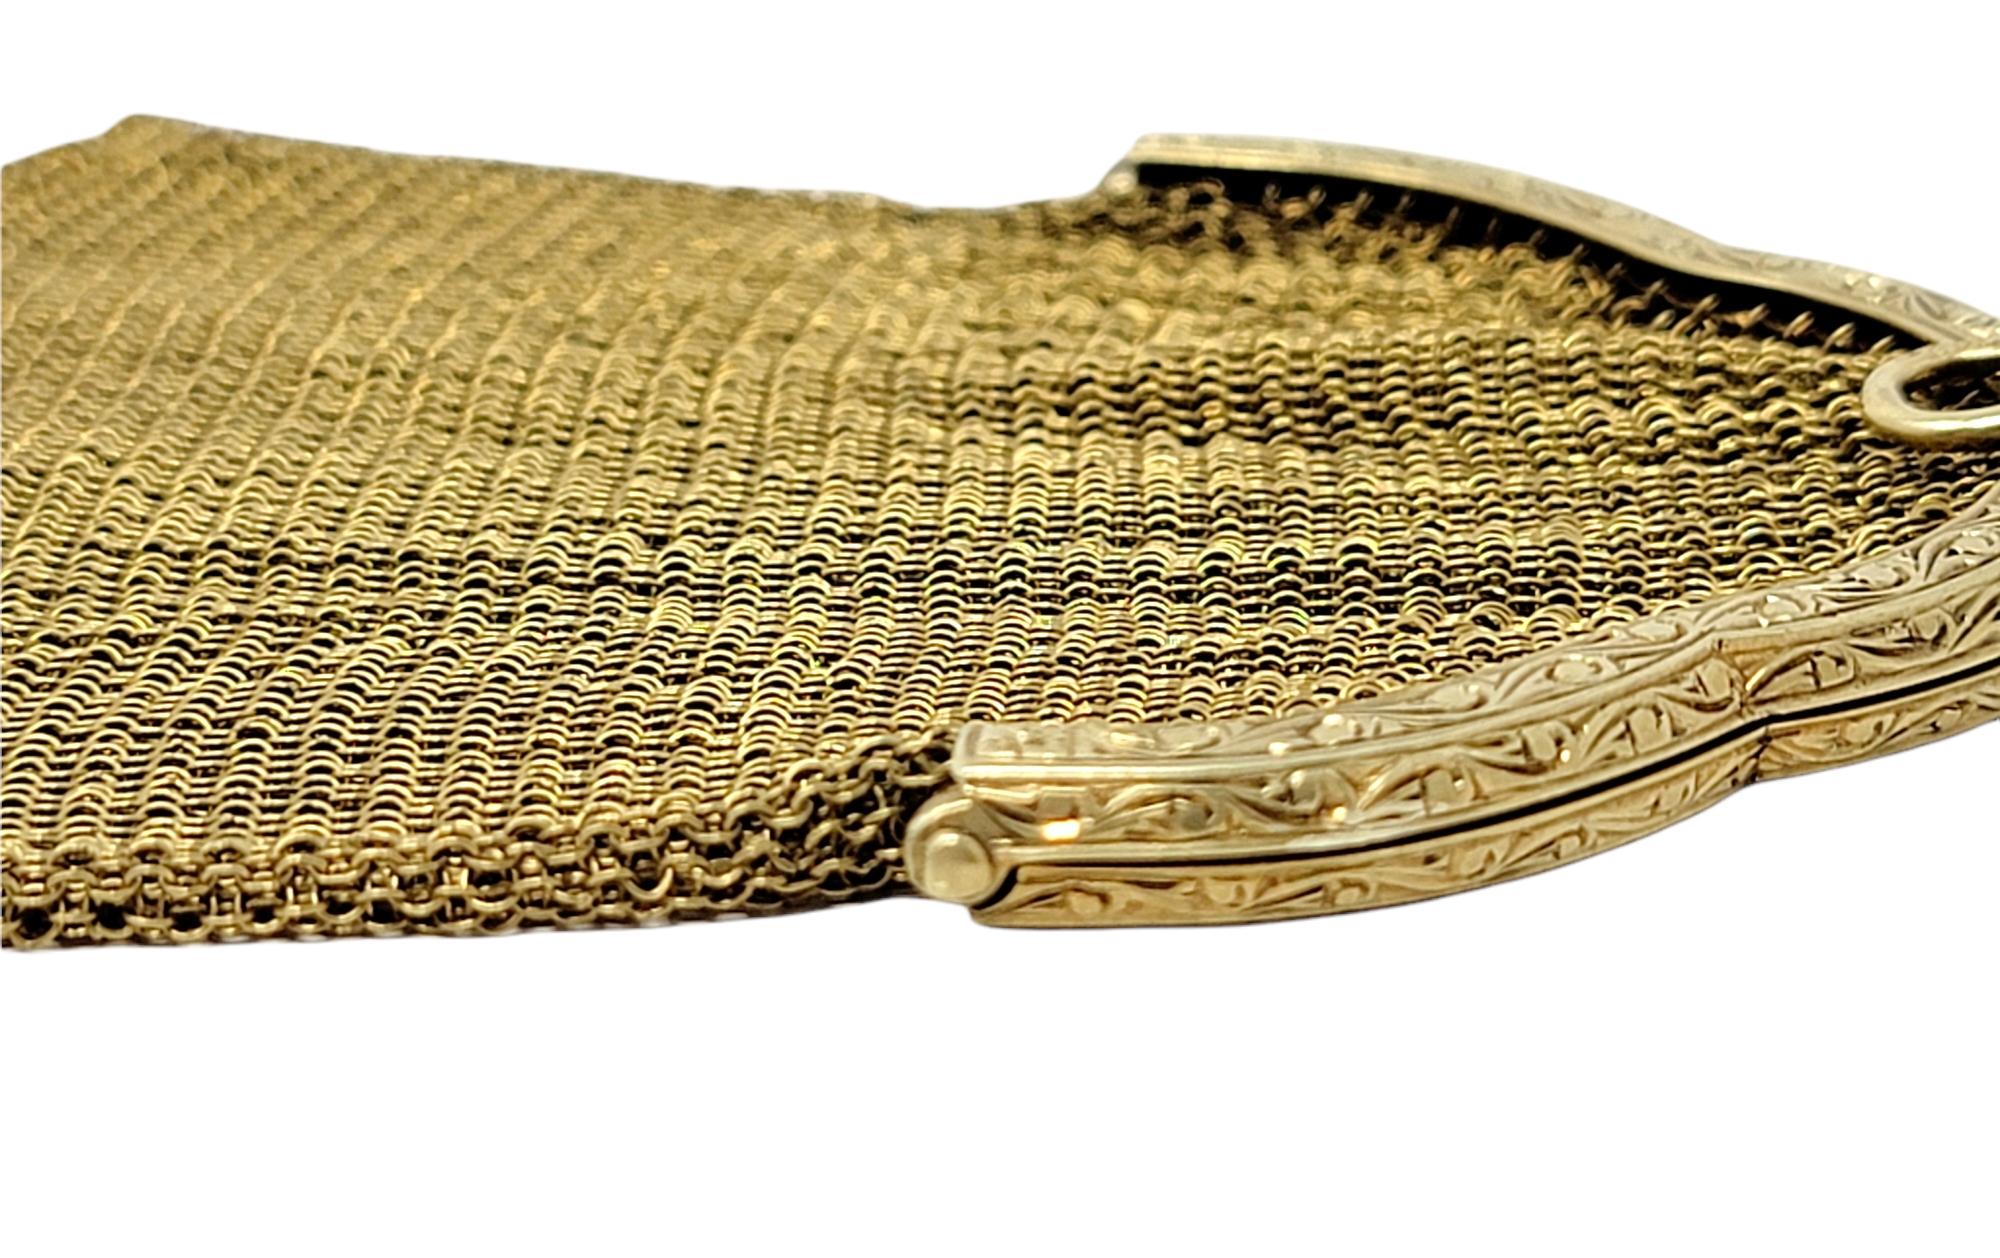 Vintage Art Deco 14 Karat Gold Mesh Coin Purse with Sapphire Cabochon Details In Good Condition For Sale In Scottsdale, AZ